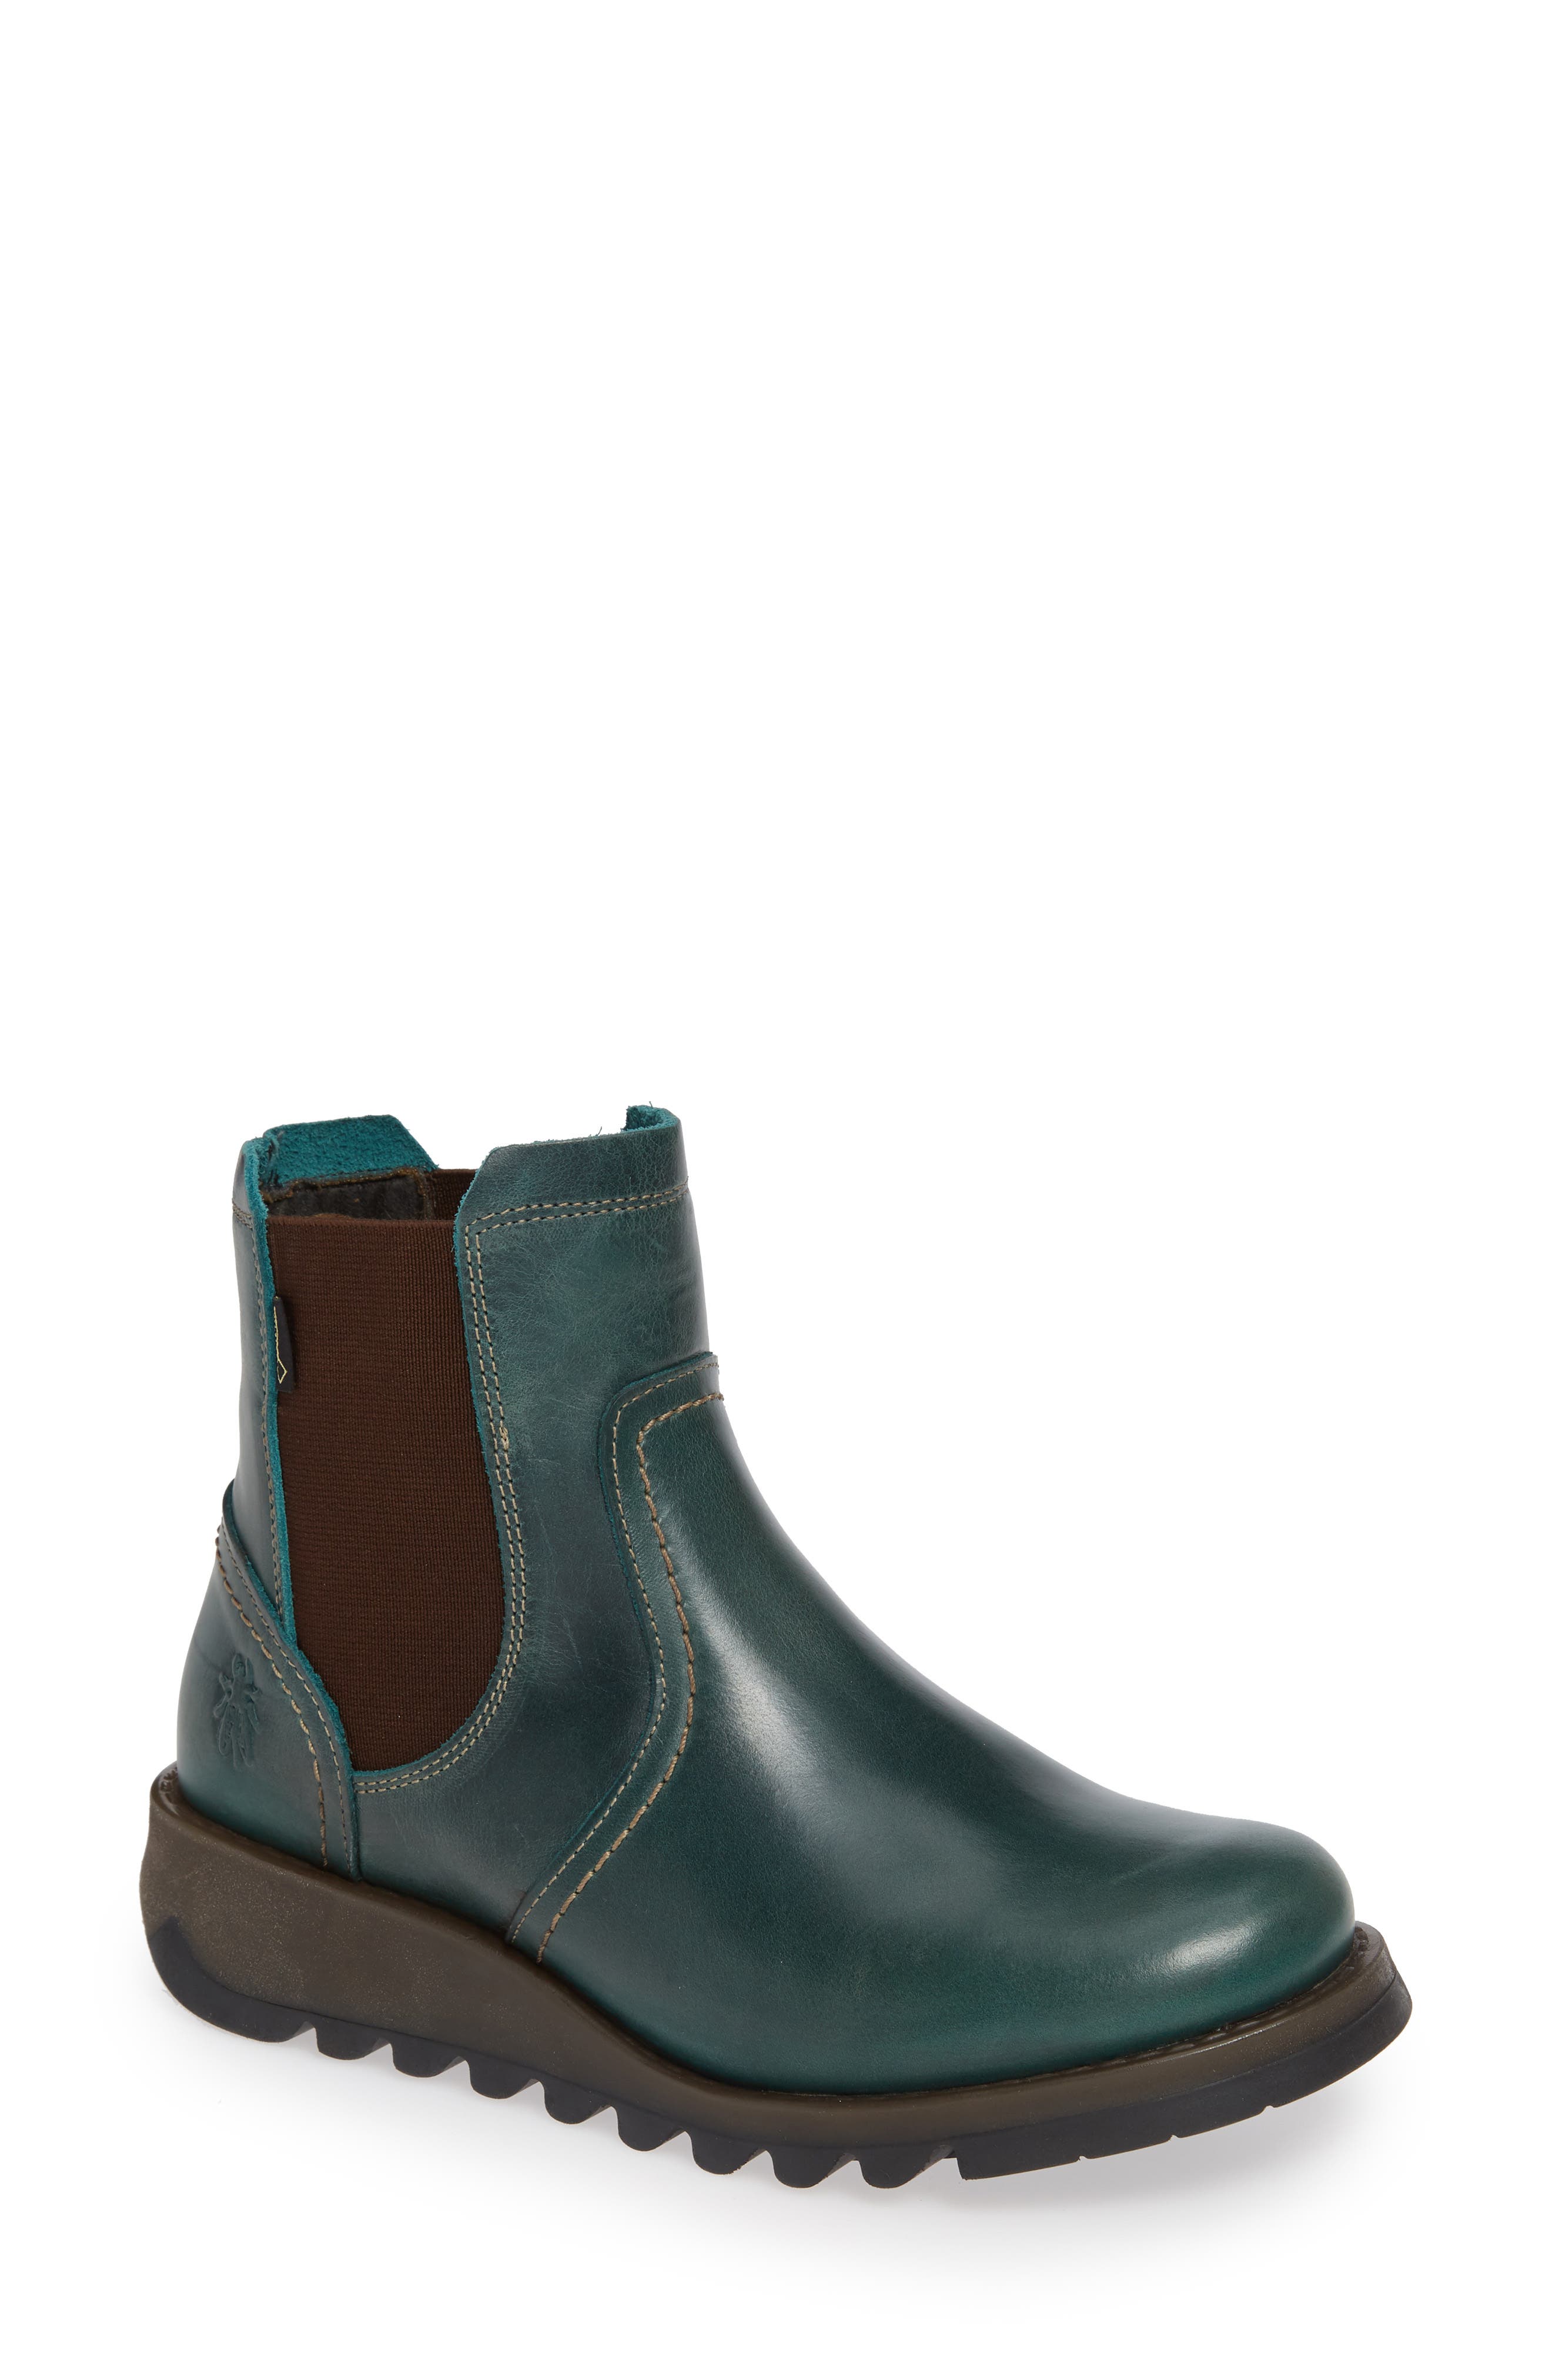 gore tex chelsea boots womens